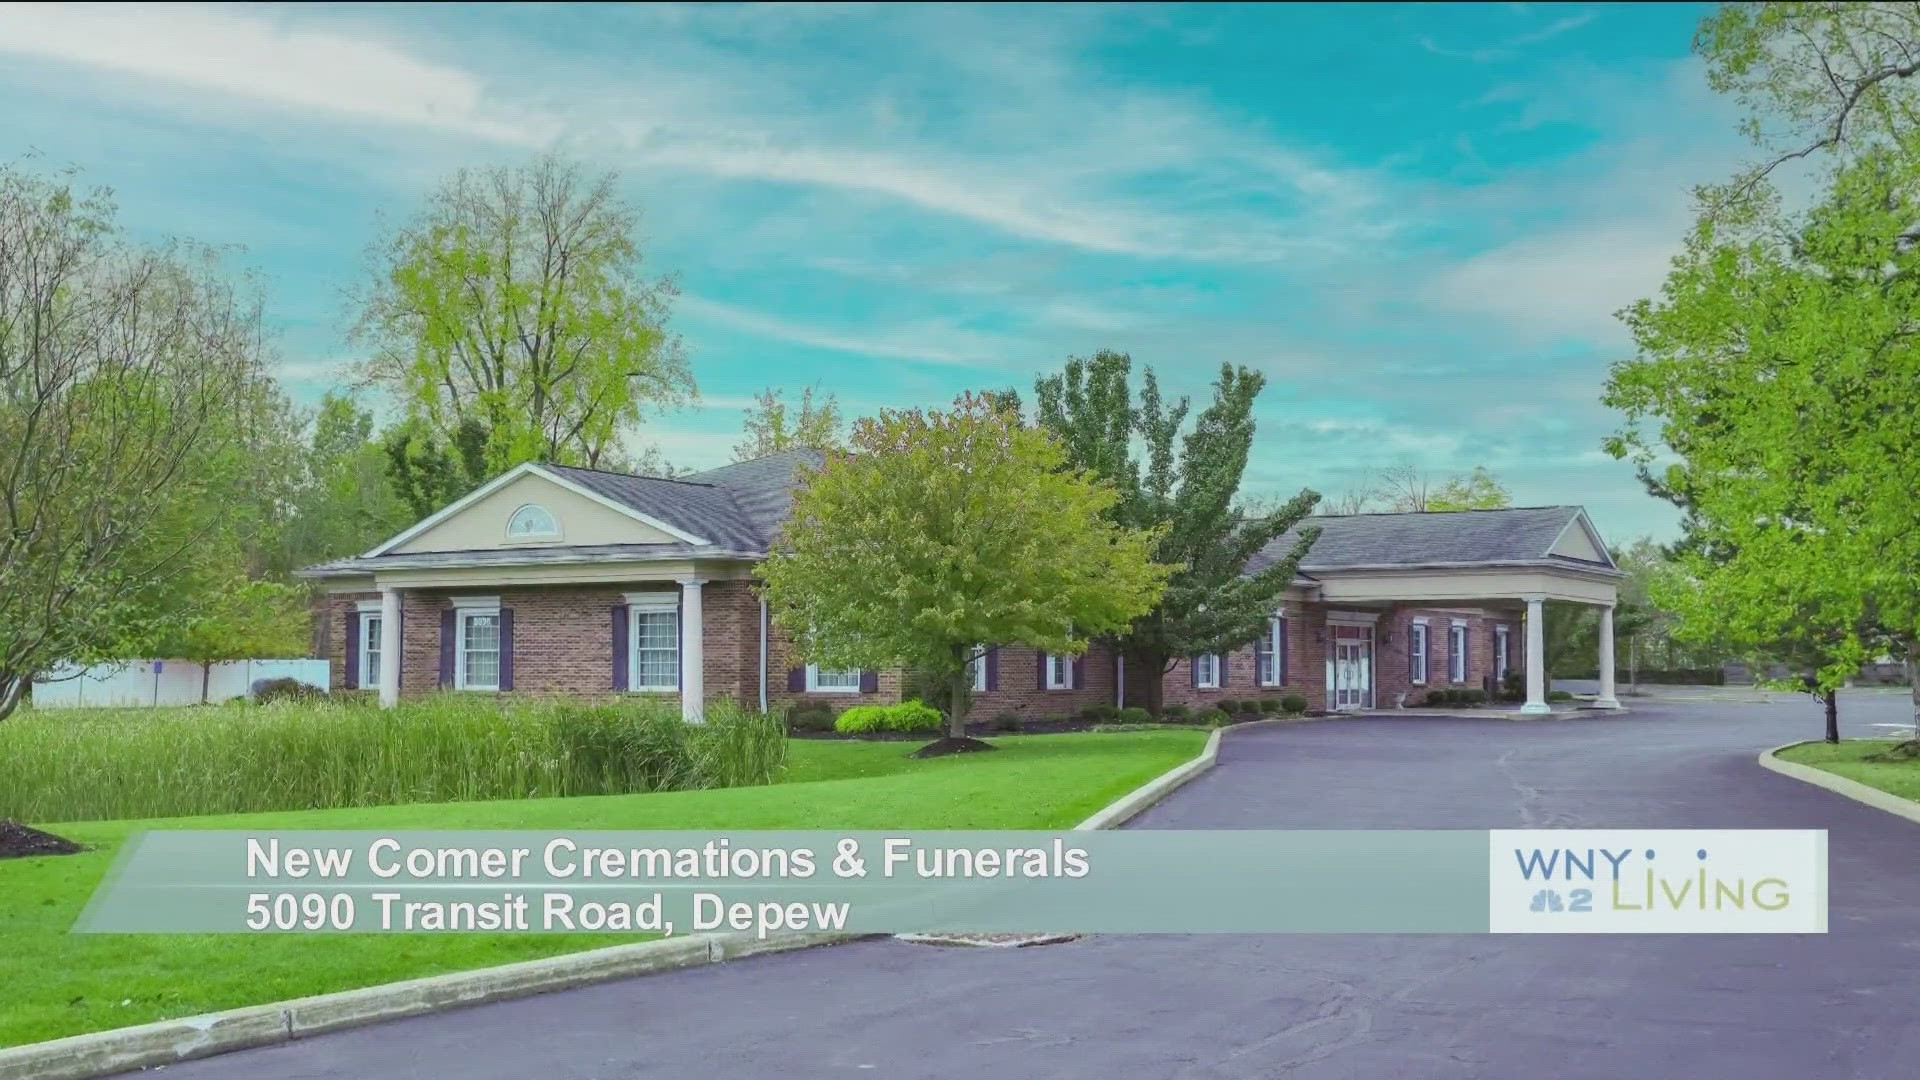 WNY Living - April 20th- New Comer Cremations & Funerals ( THIS VIDEO IS SPONSORED BY NEW COMER CREMATION & FUNERALS